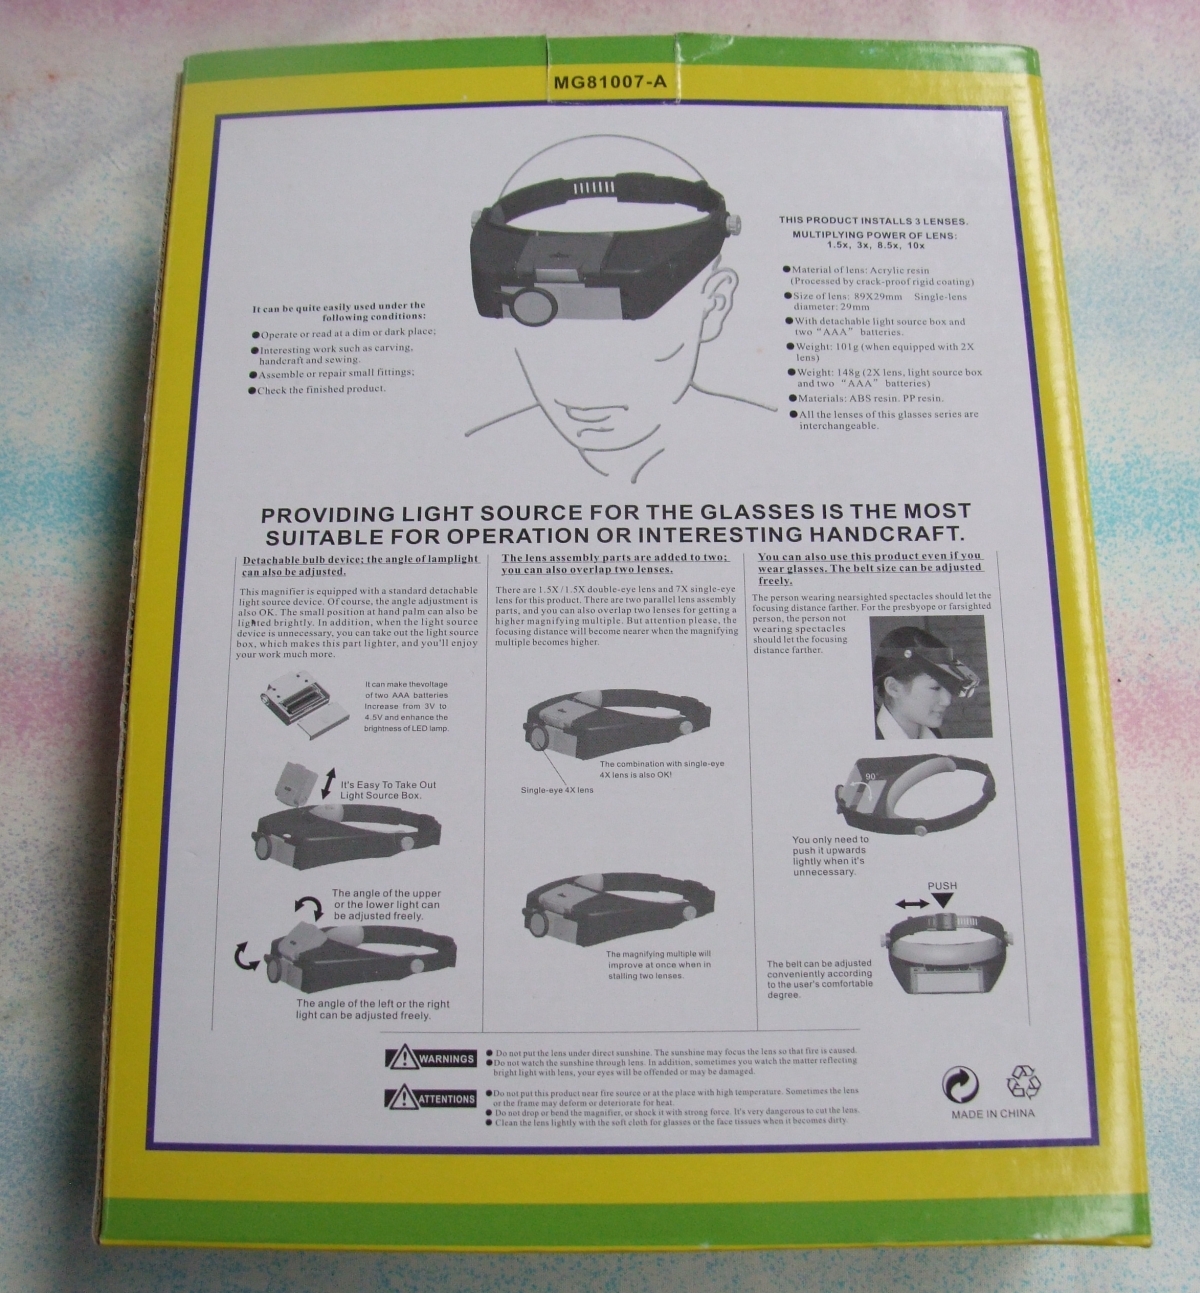 Budget Headband Magnifier with led light and swivel loupe